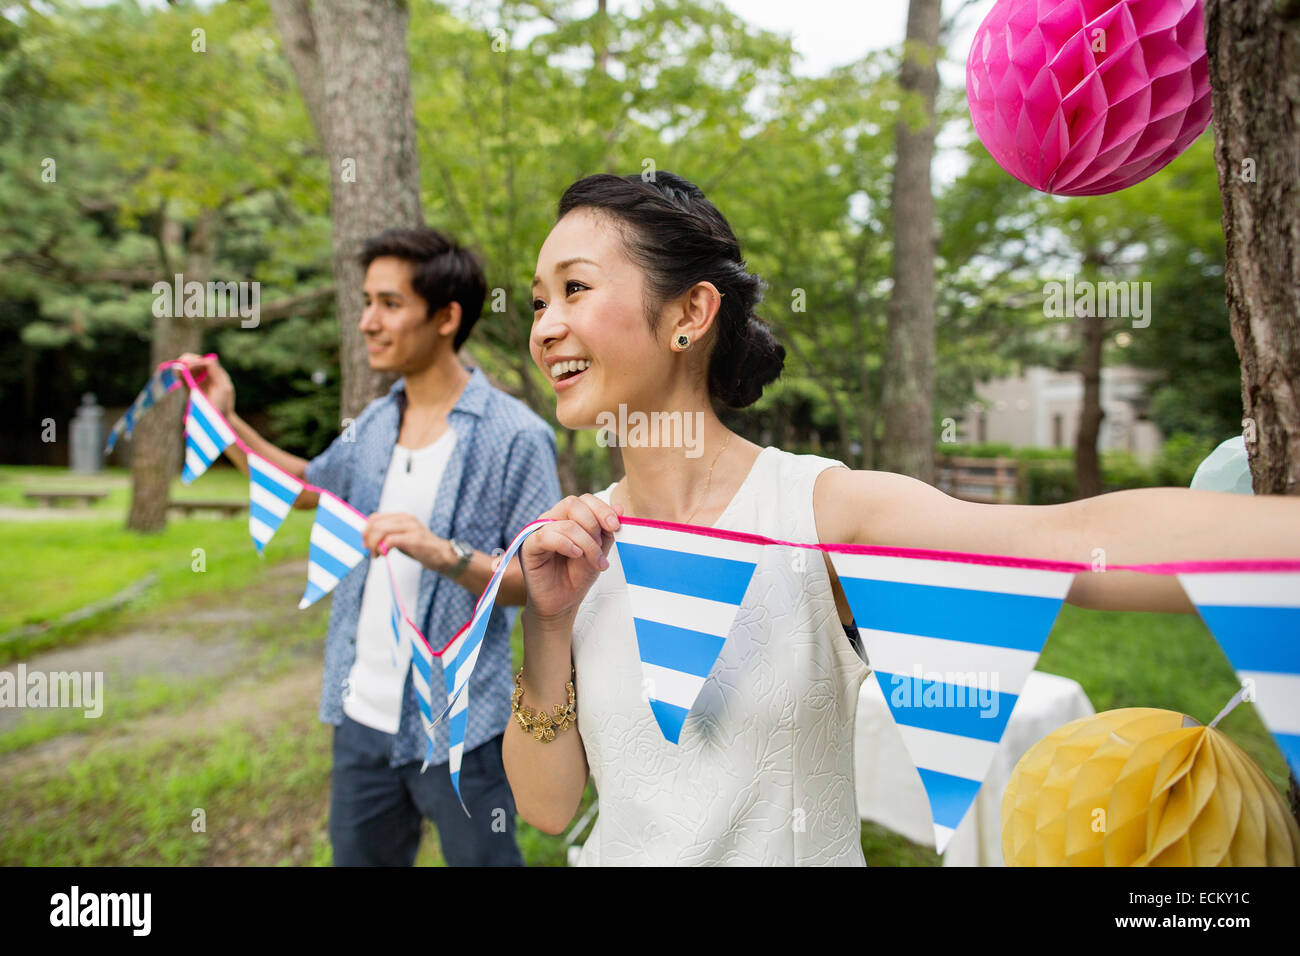 Group of people hanging lanterns and flags on trees in a wood. Stock Photo